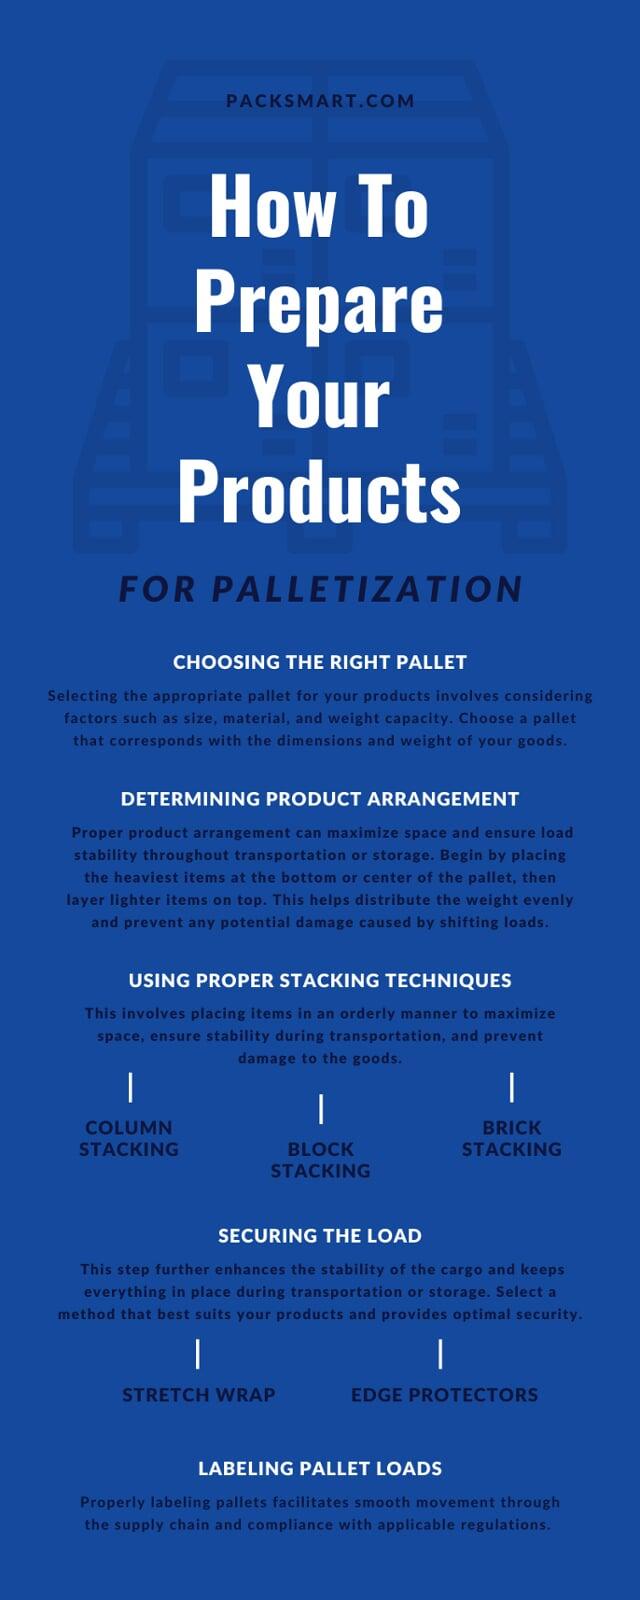 How To Prepare Your Products for Palletization